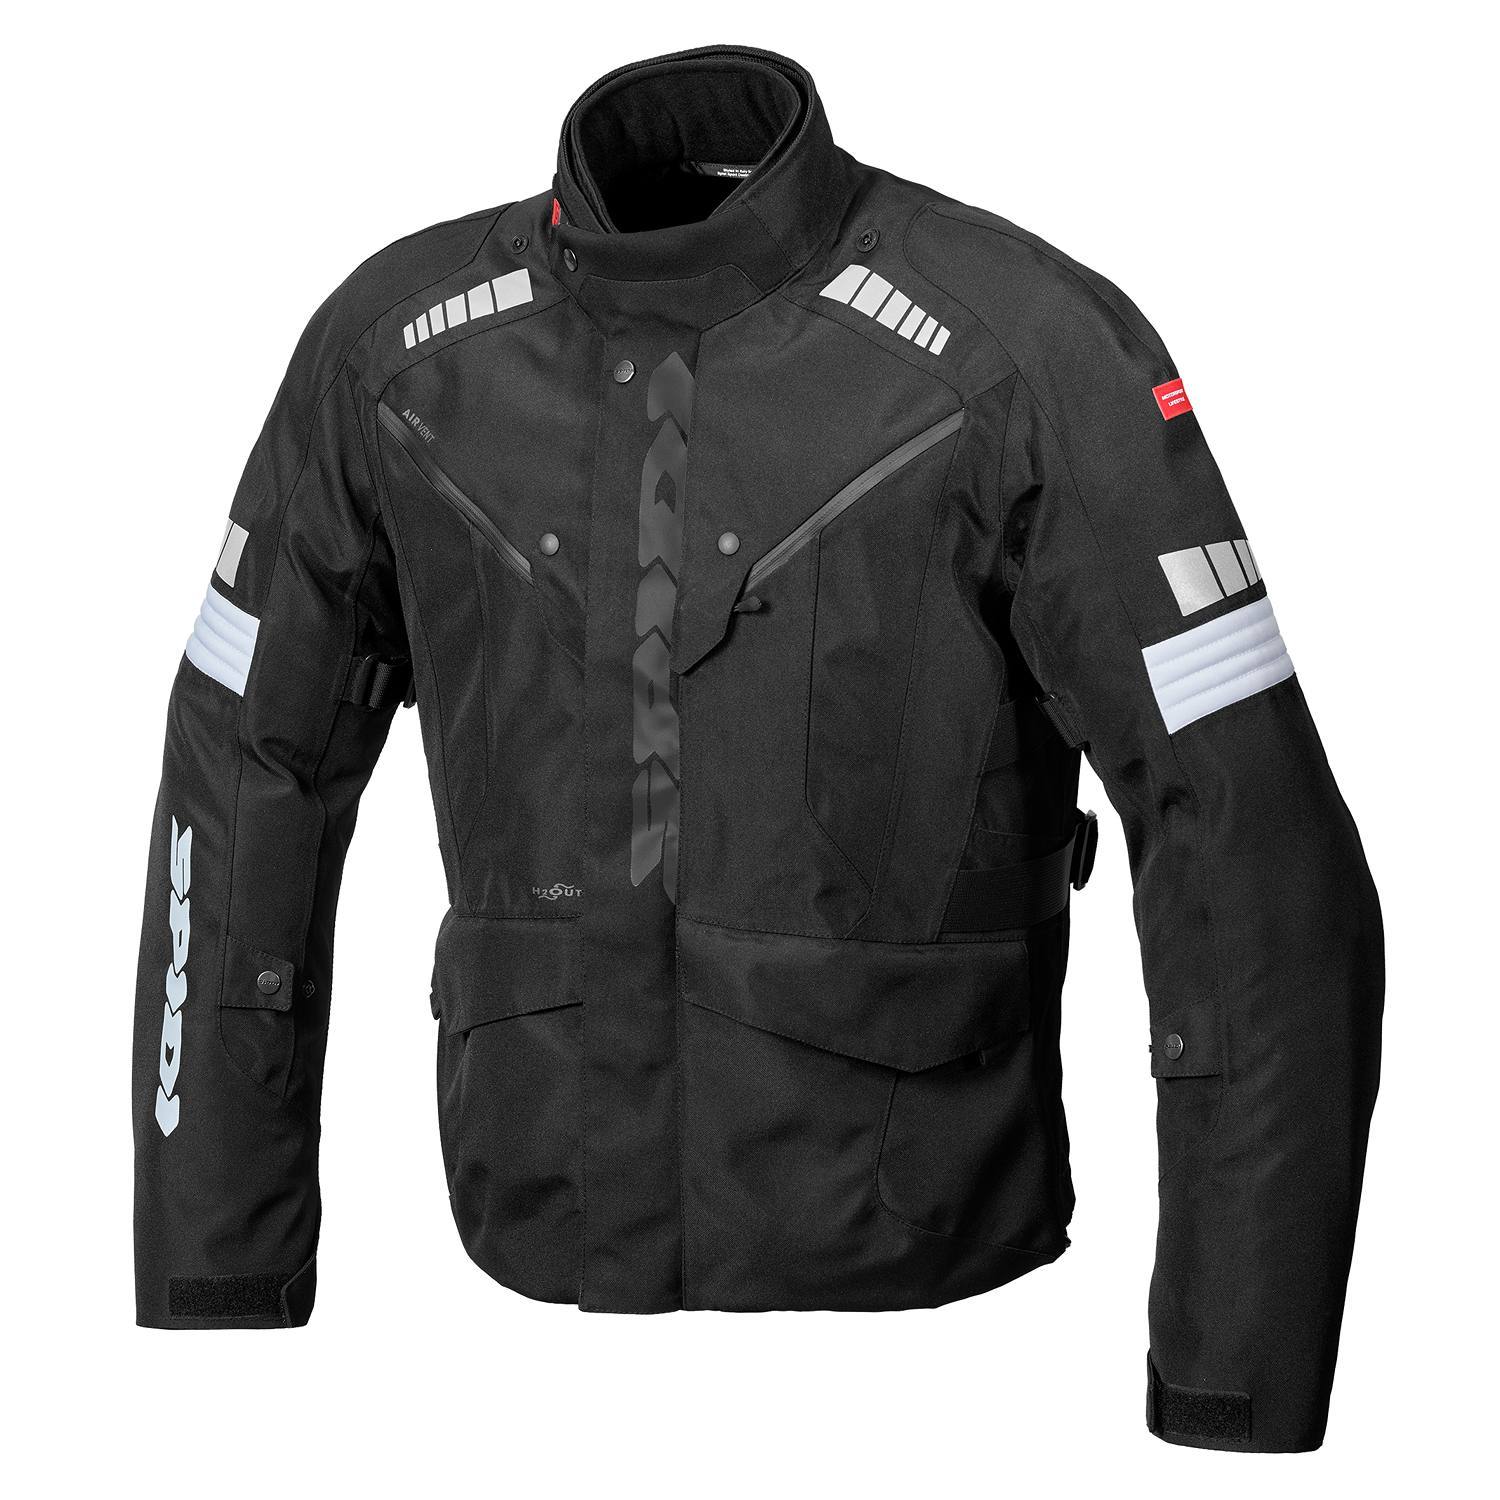 Image of Spidi Outlander Robust H2Out Jacket Black Size 2XL ID 8030161344189